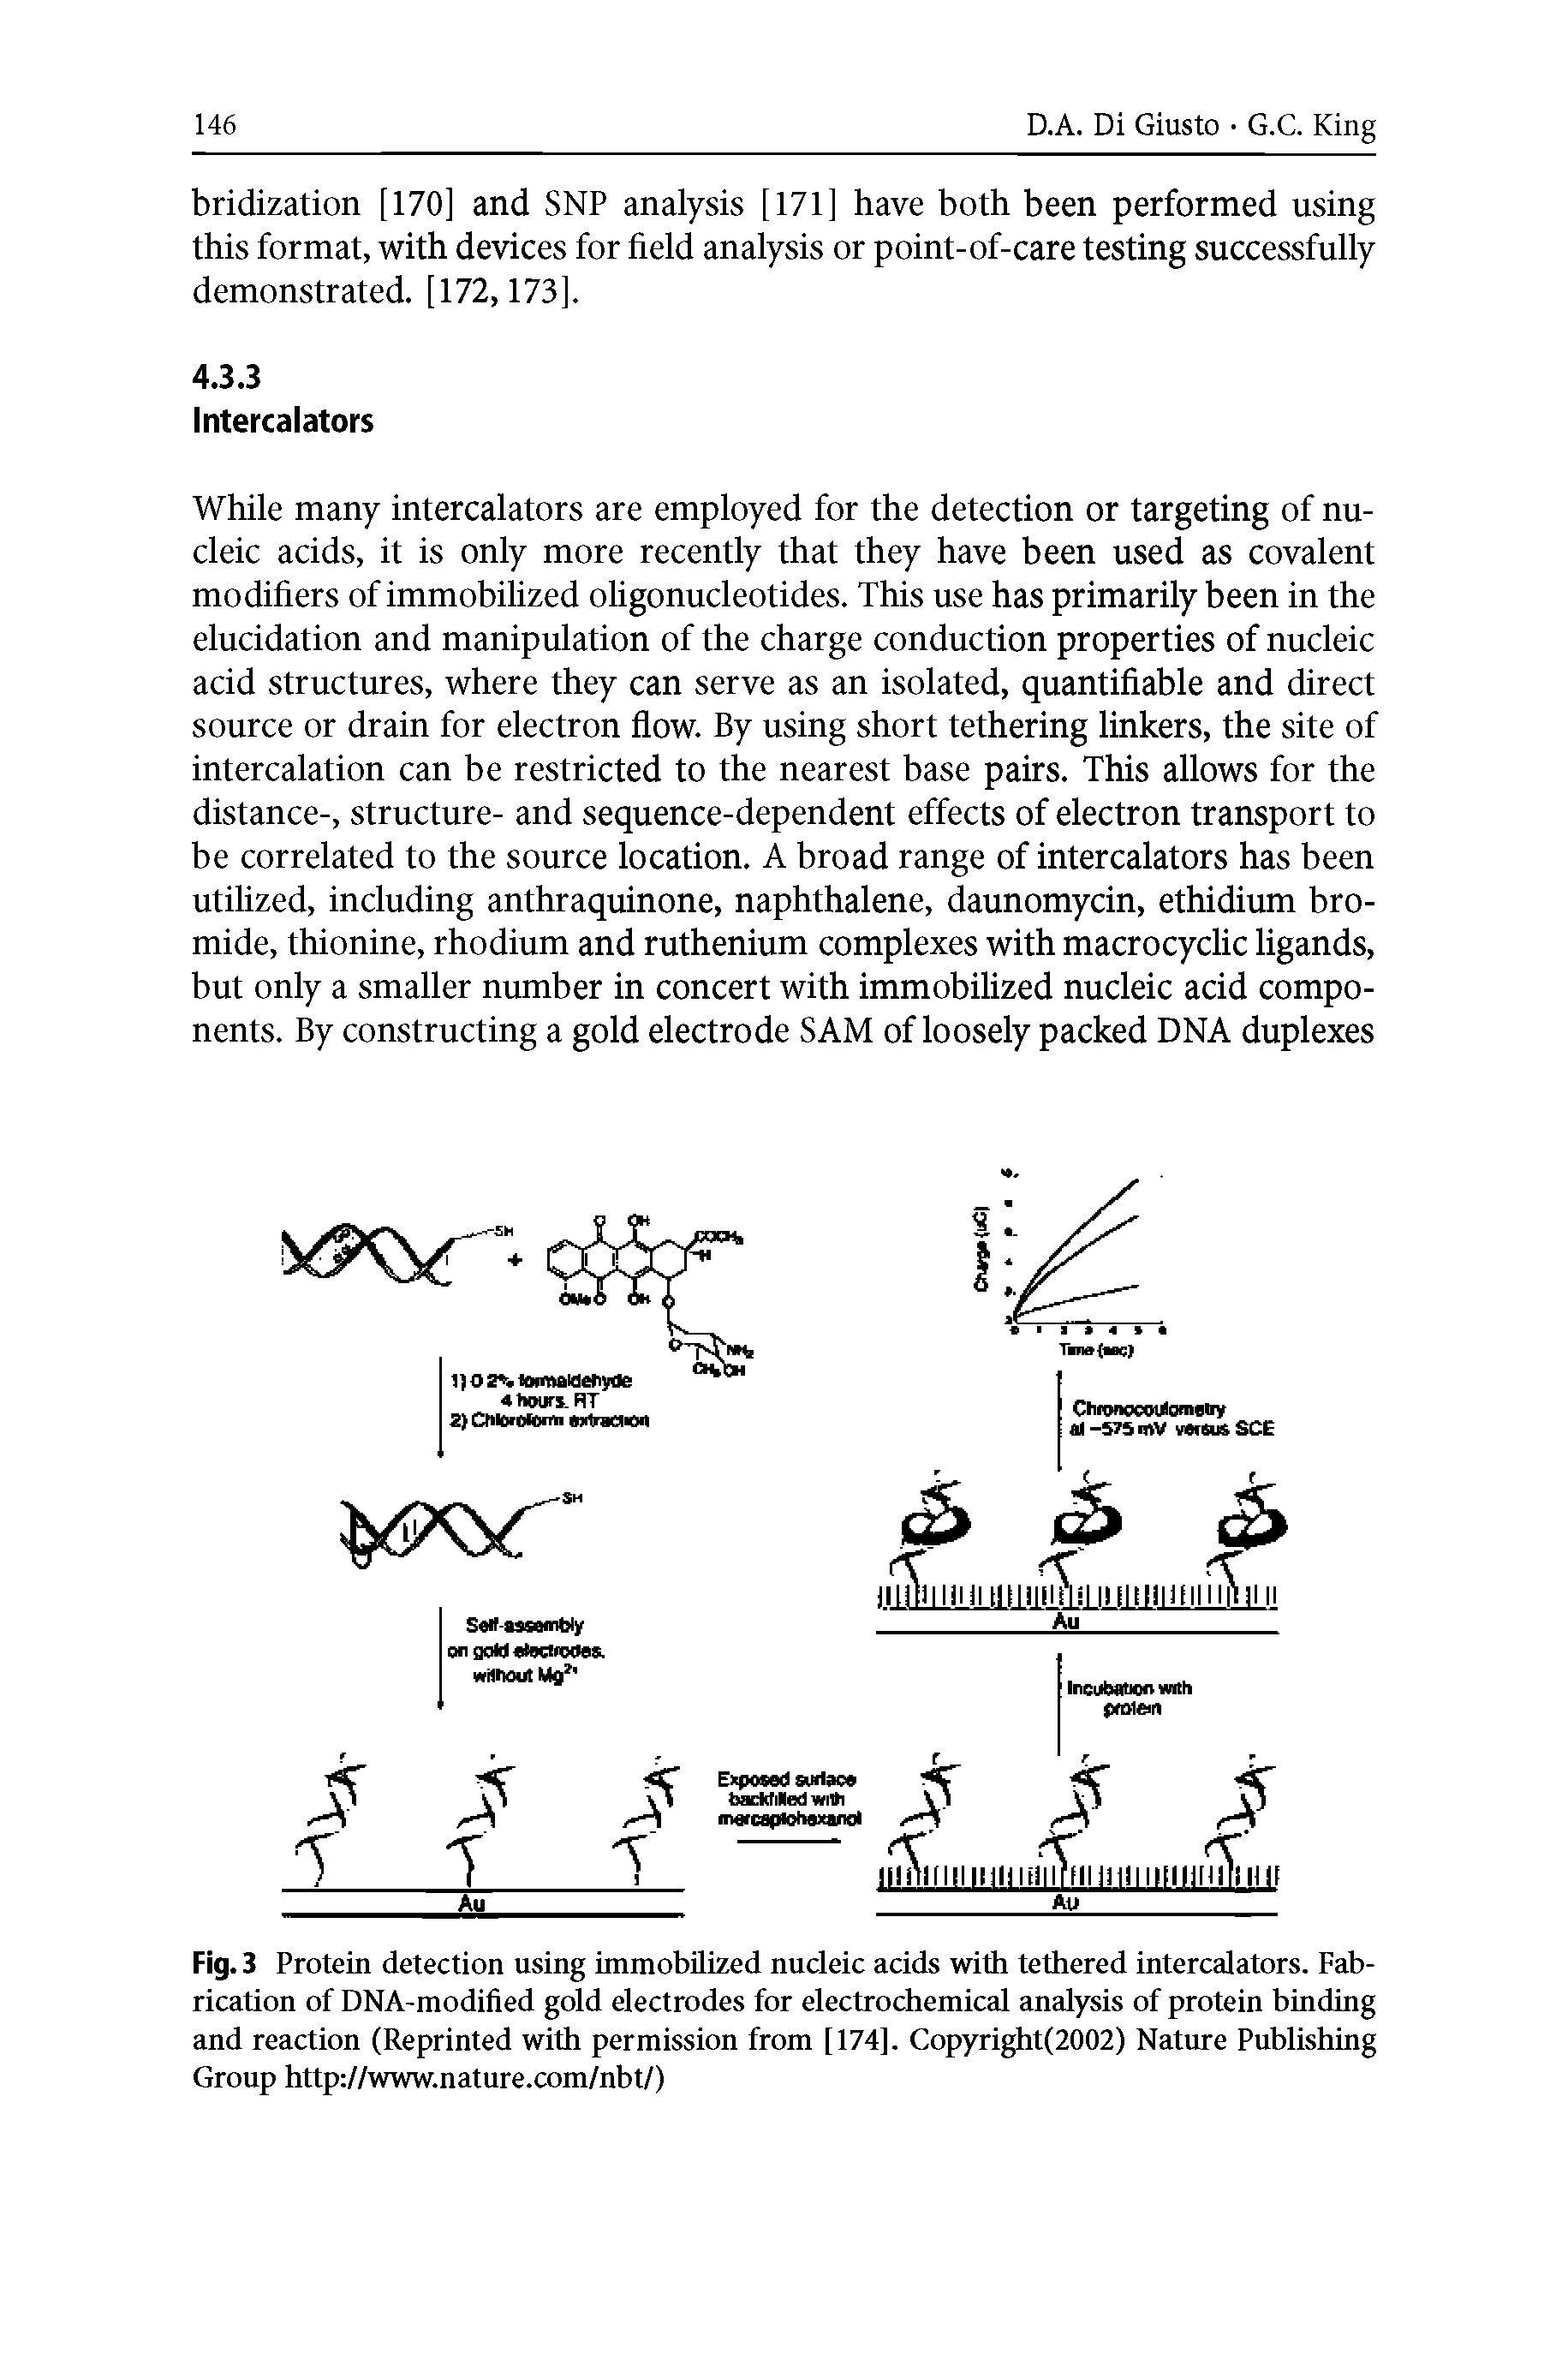 Fig. 3 Protein detection using immobilized nucleic acids with tethered intercalators. Fabrication of DNA-modified gold electrodes for electrochemical analysis of protein binding and reaction (Reprinted with permission from [174], Copyright(2002) Nature Publishing Group http //www.nature.com/nbt/)...